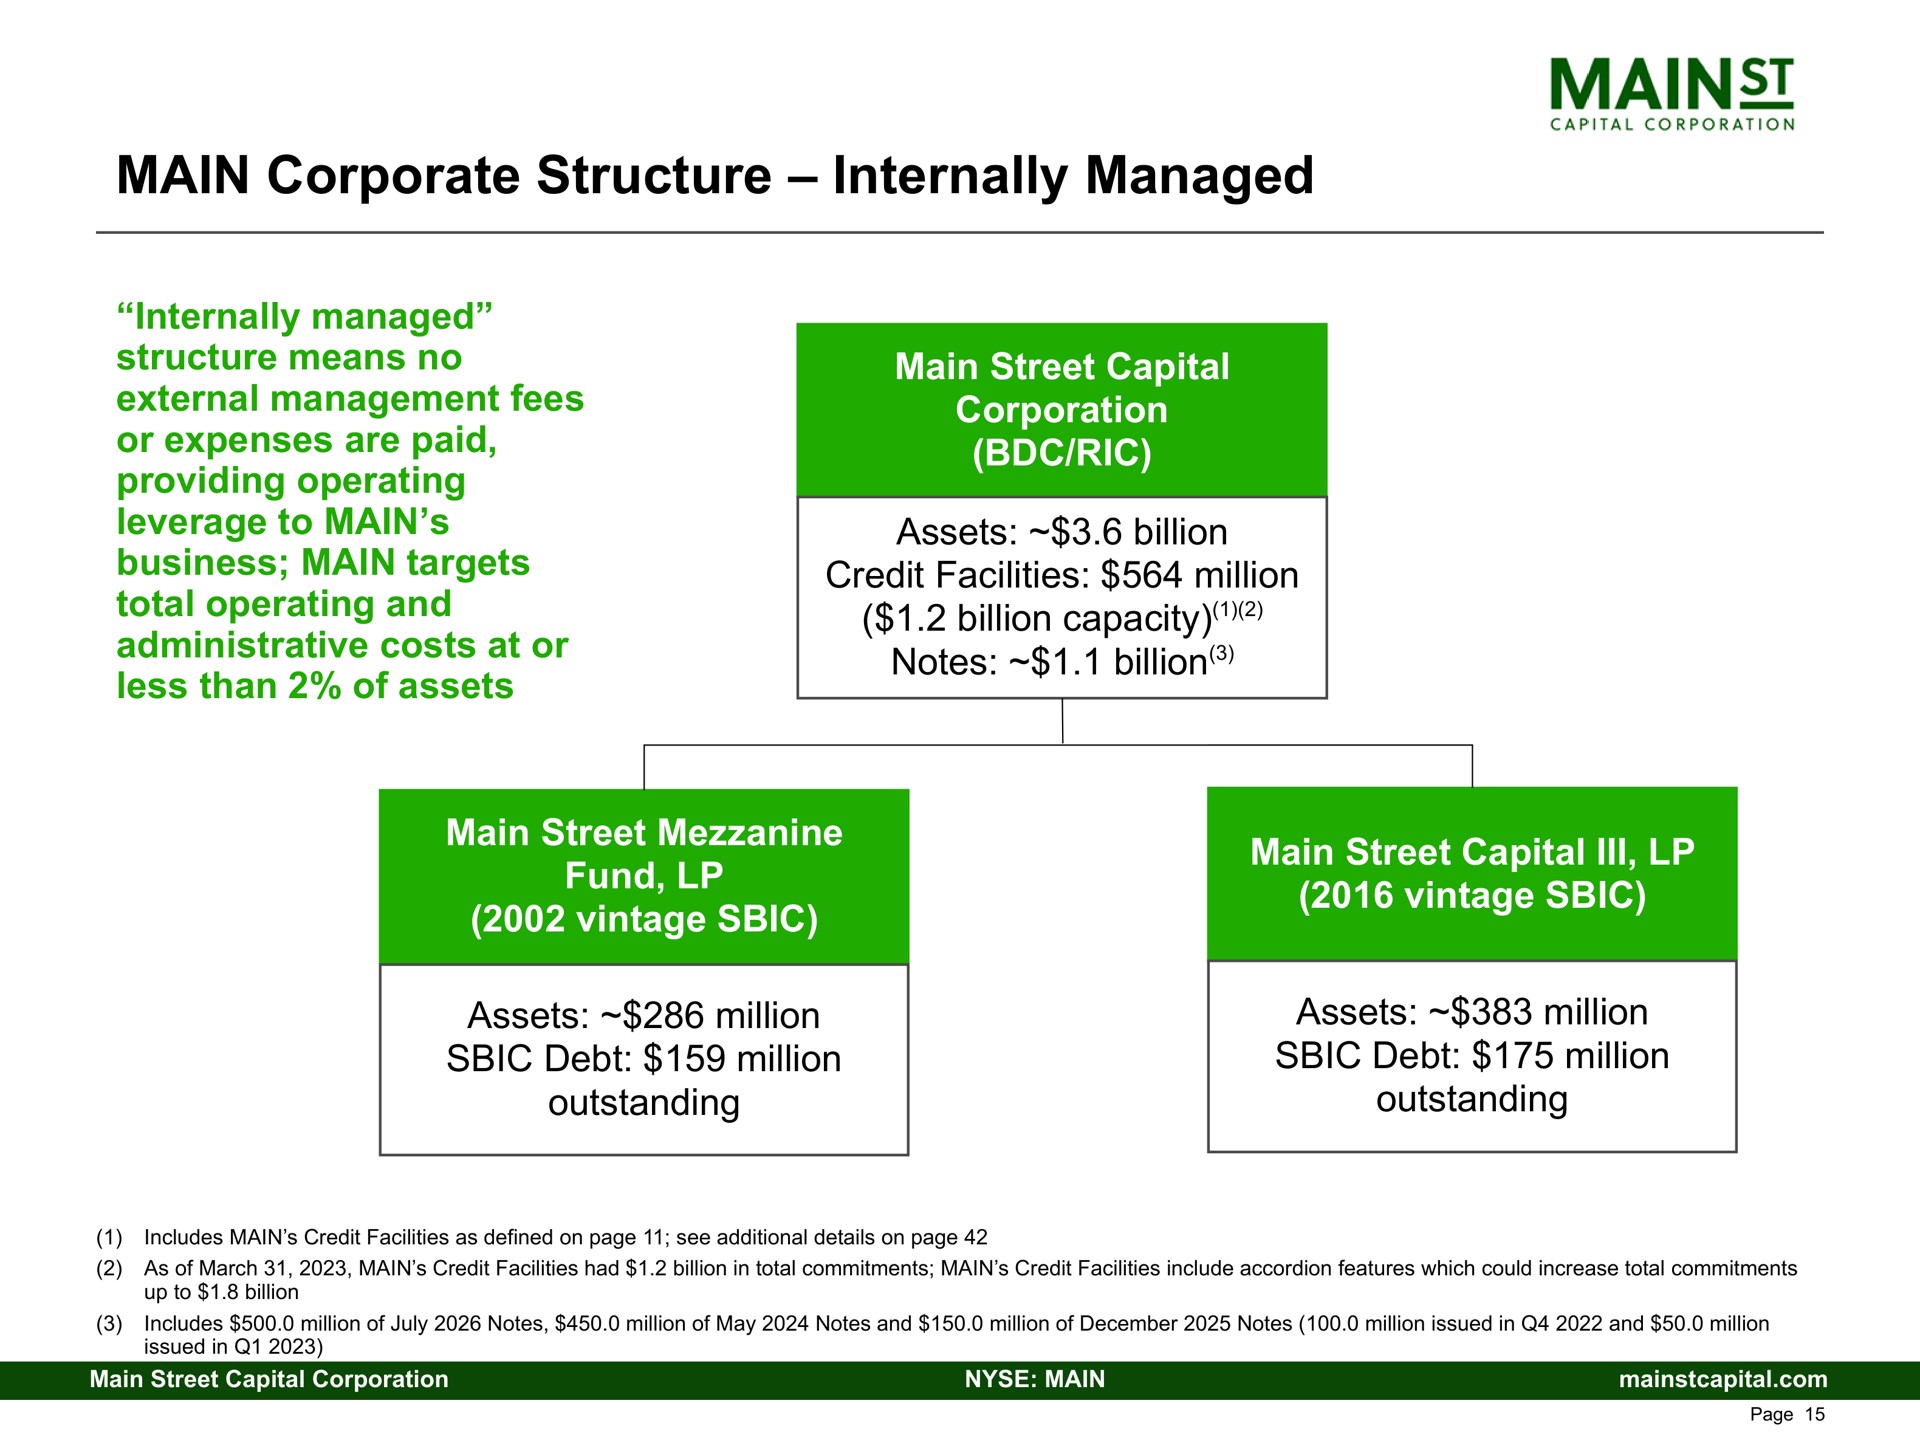 main corporate structure internally managed business targets credit facilities million | Main Street Capital